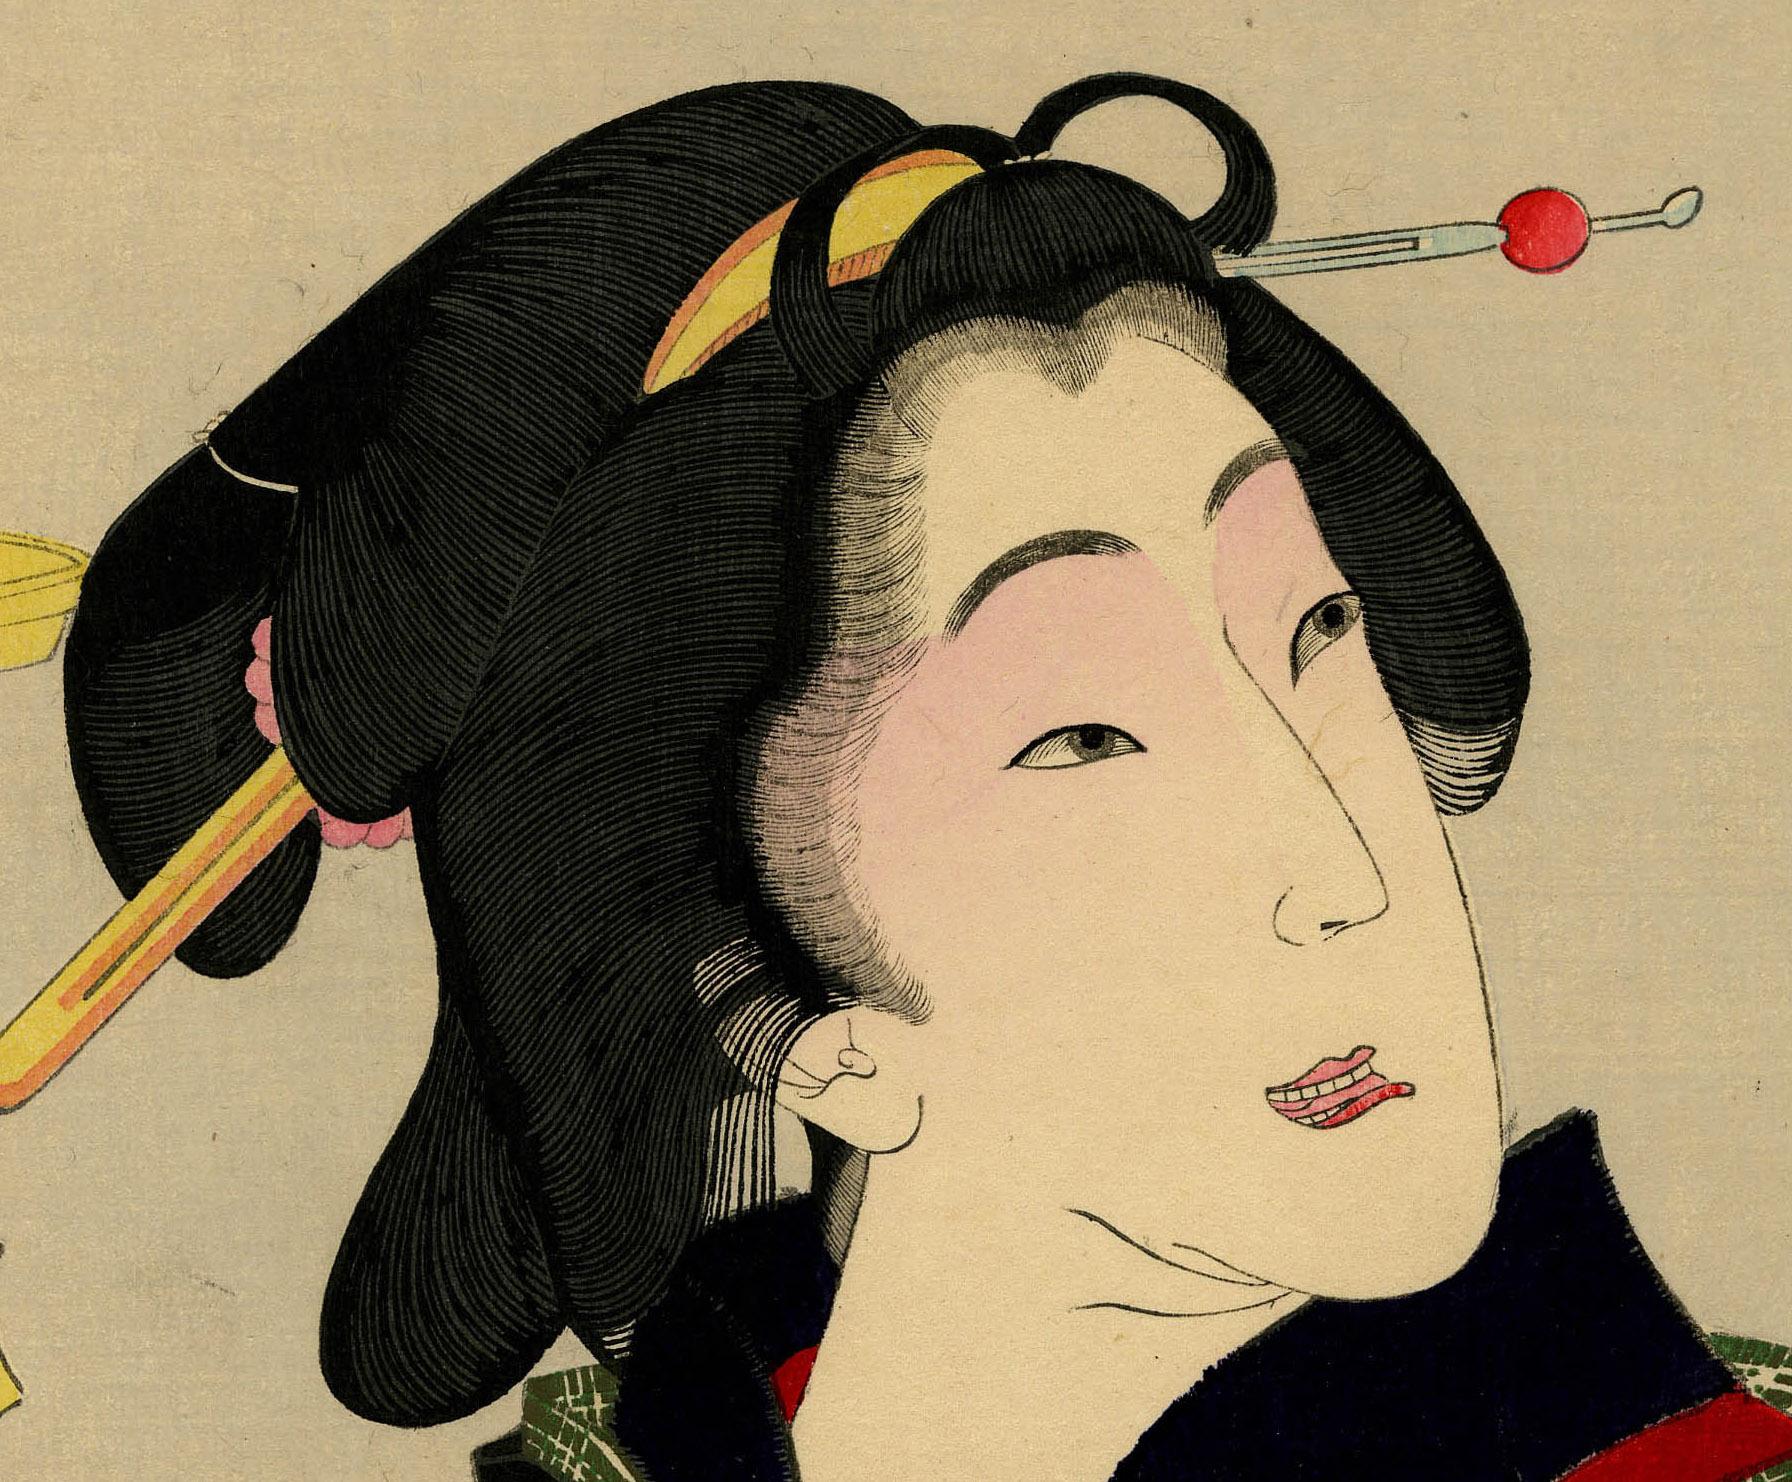 Thirsty: The Appearance of a Town Geisha - a So-Called Wine-Server - in the Anse - Print by Taiso Yoshitoshi